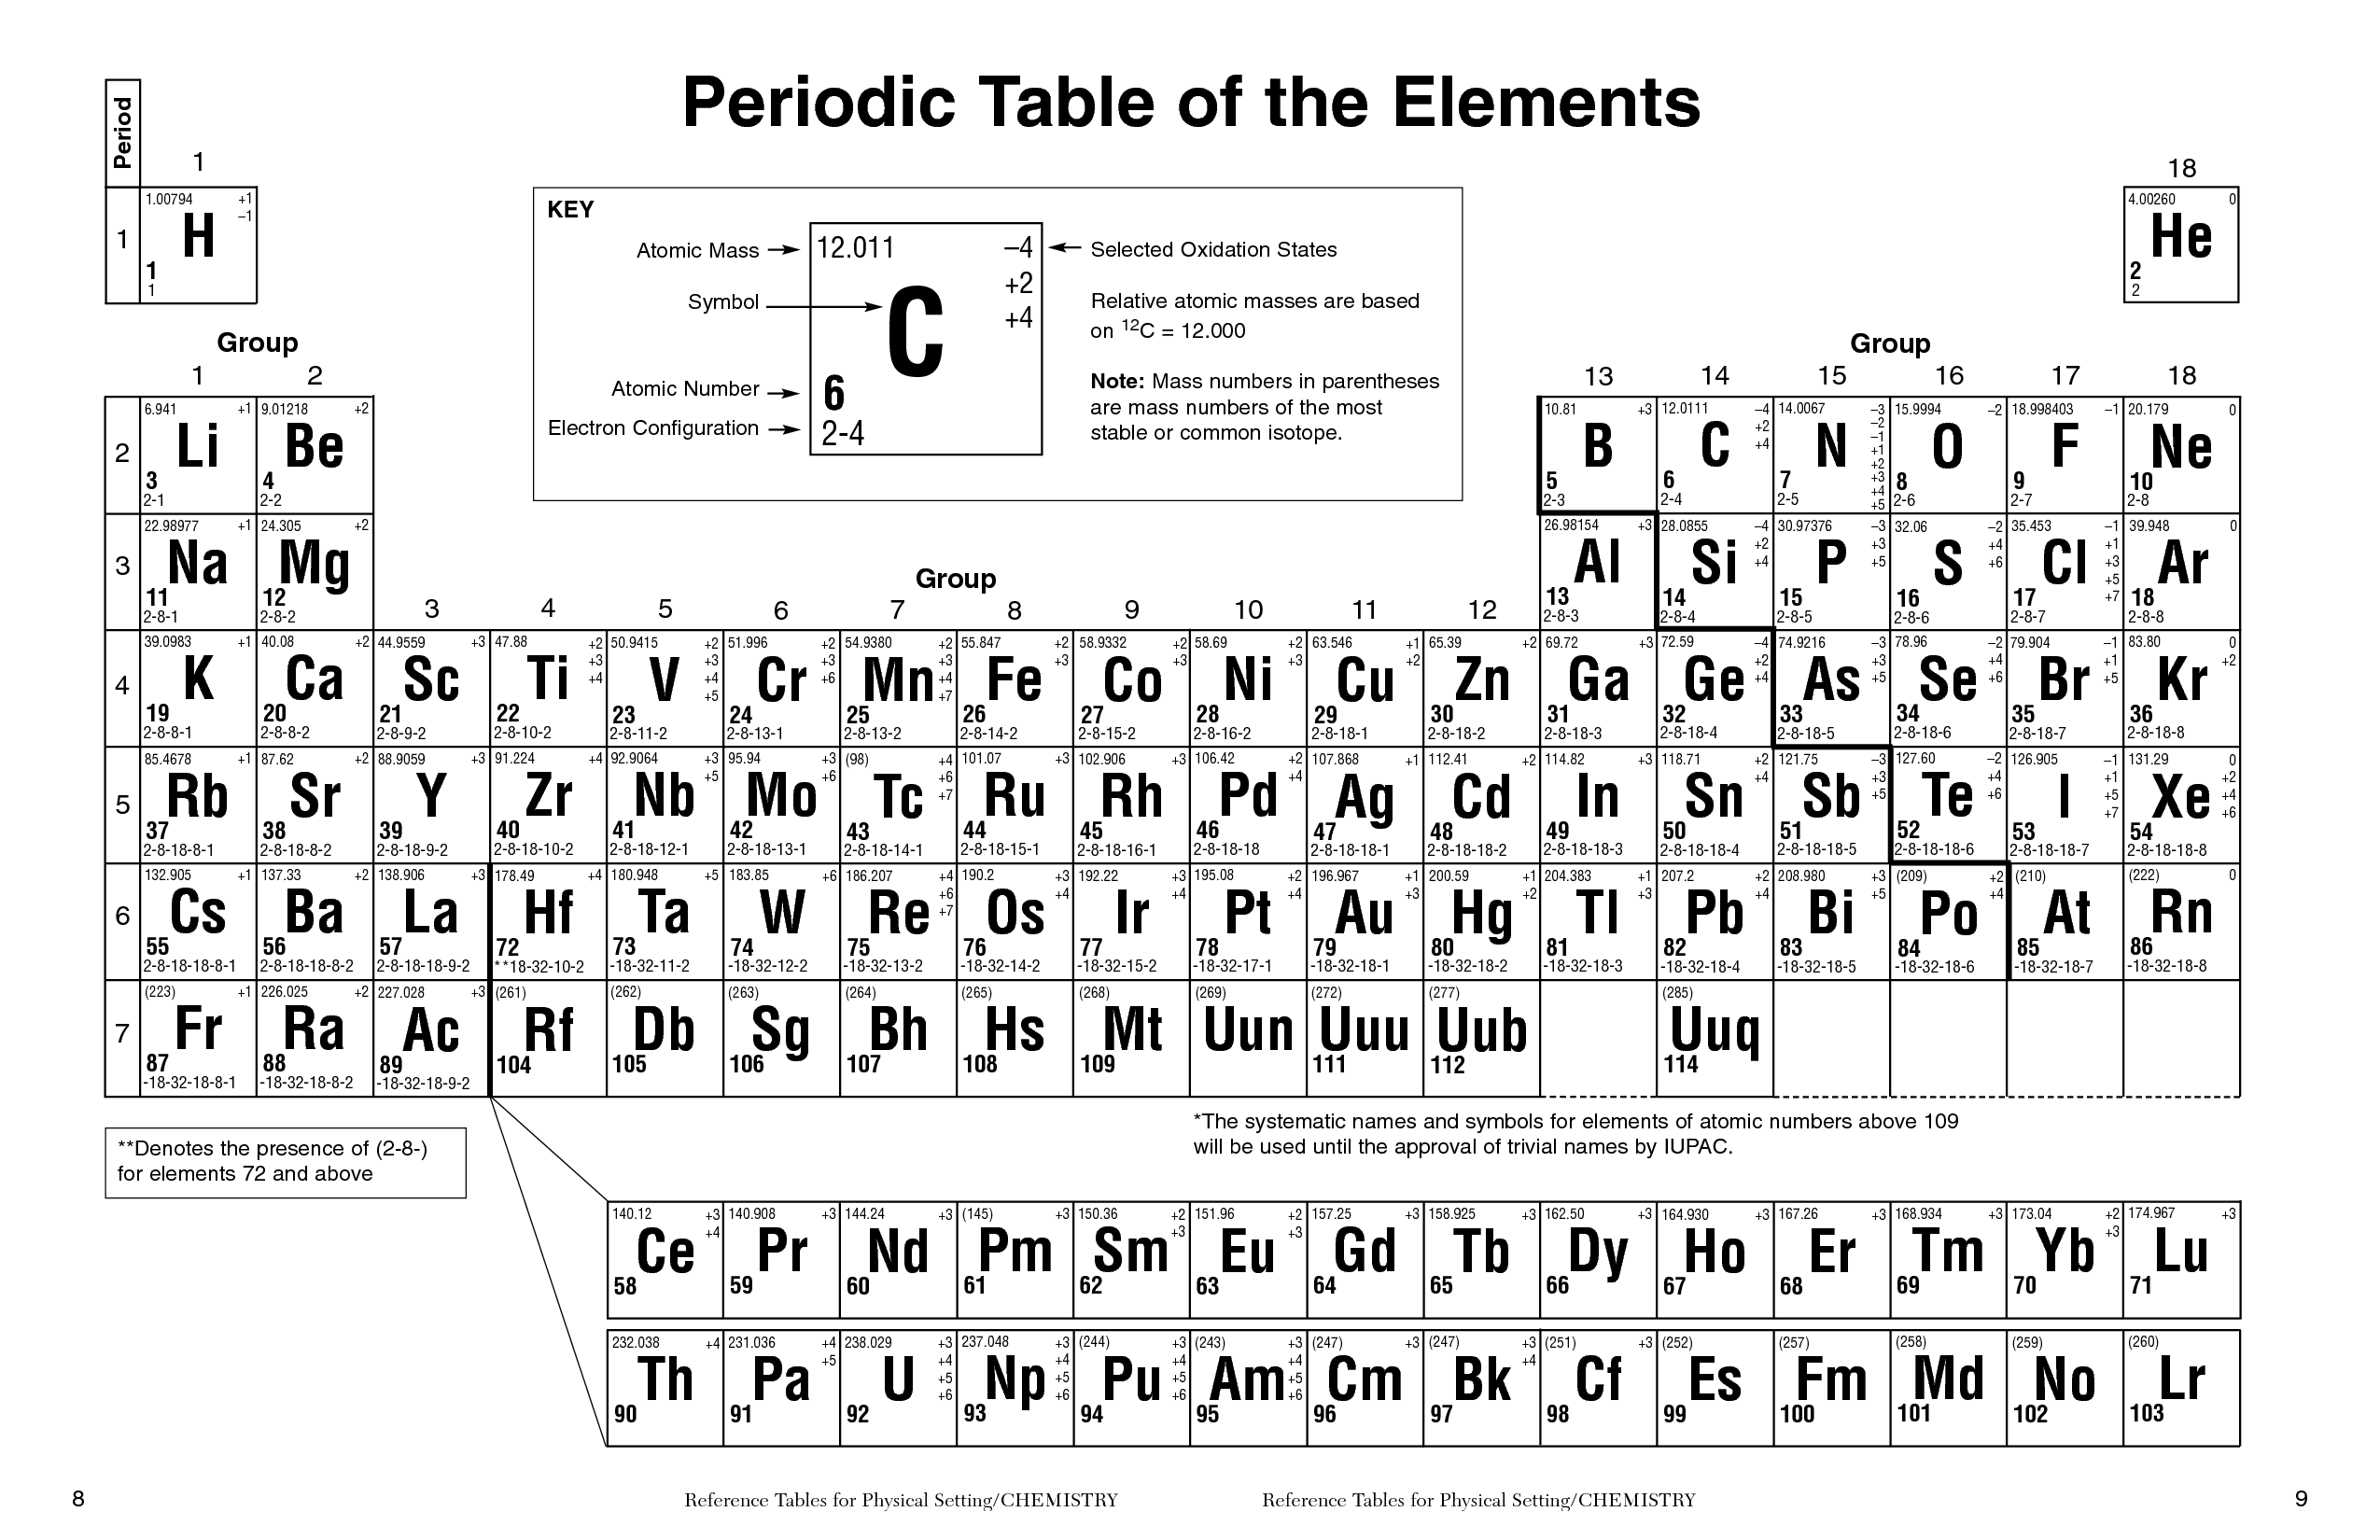 Oxidation Chart For Elements